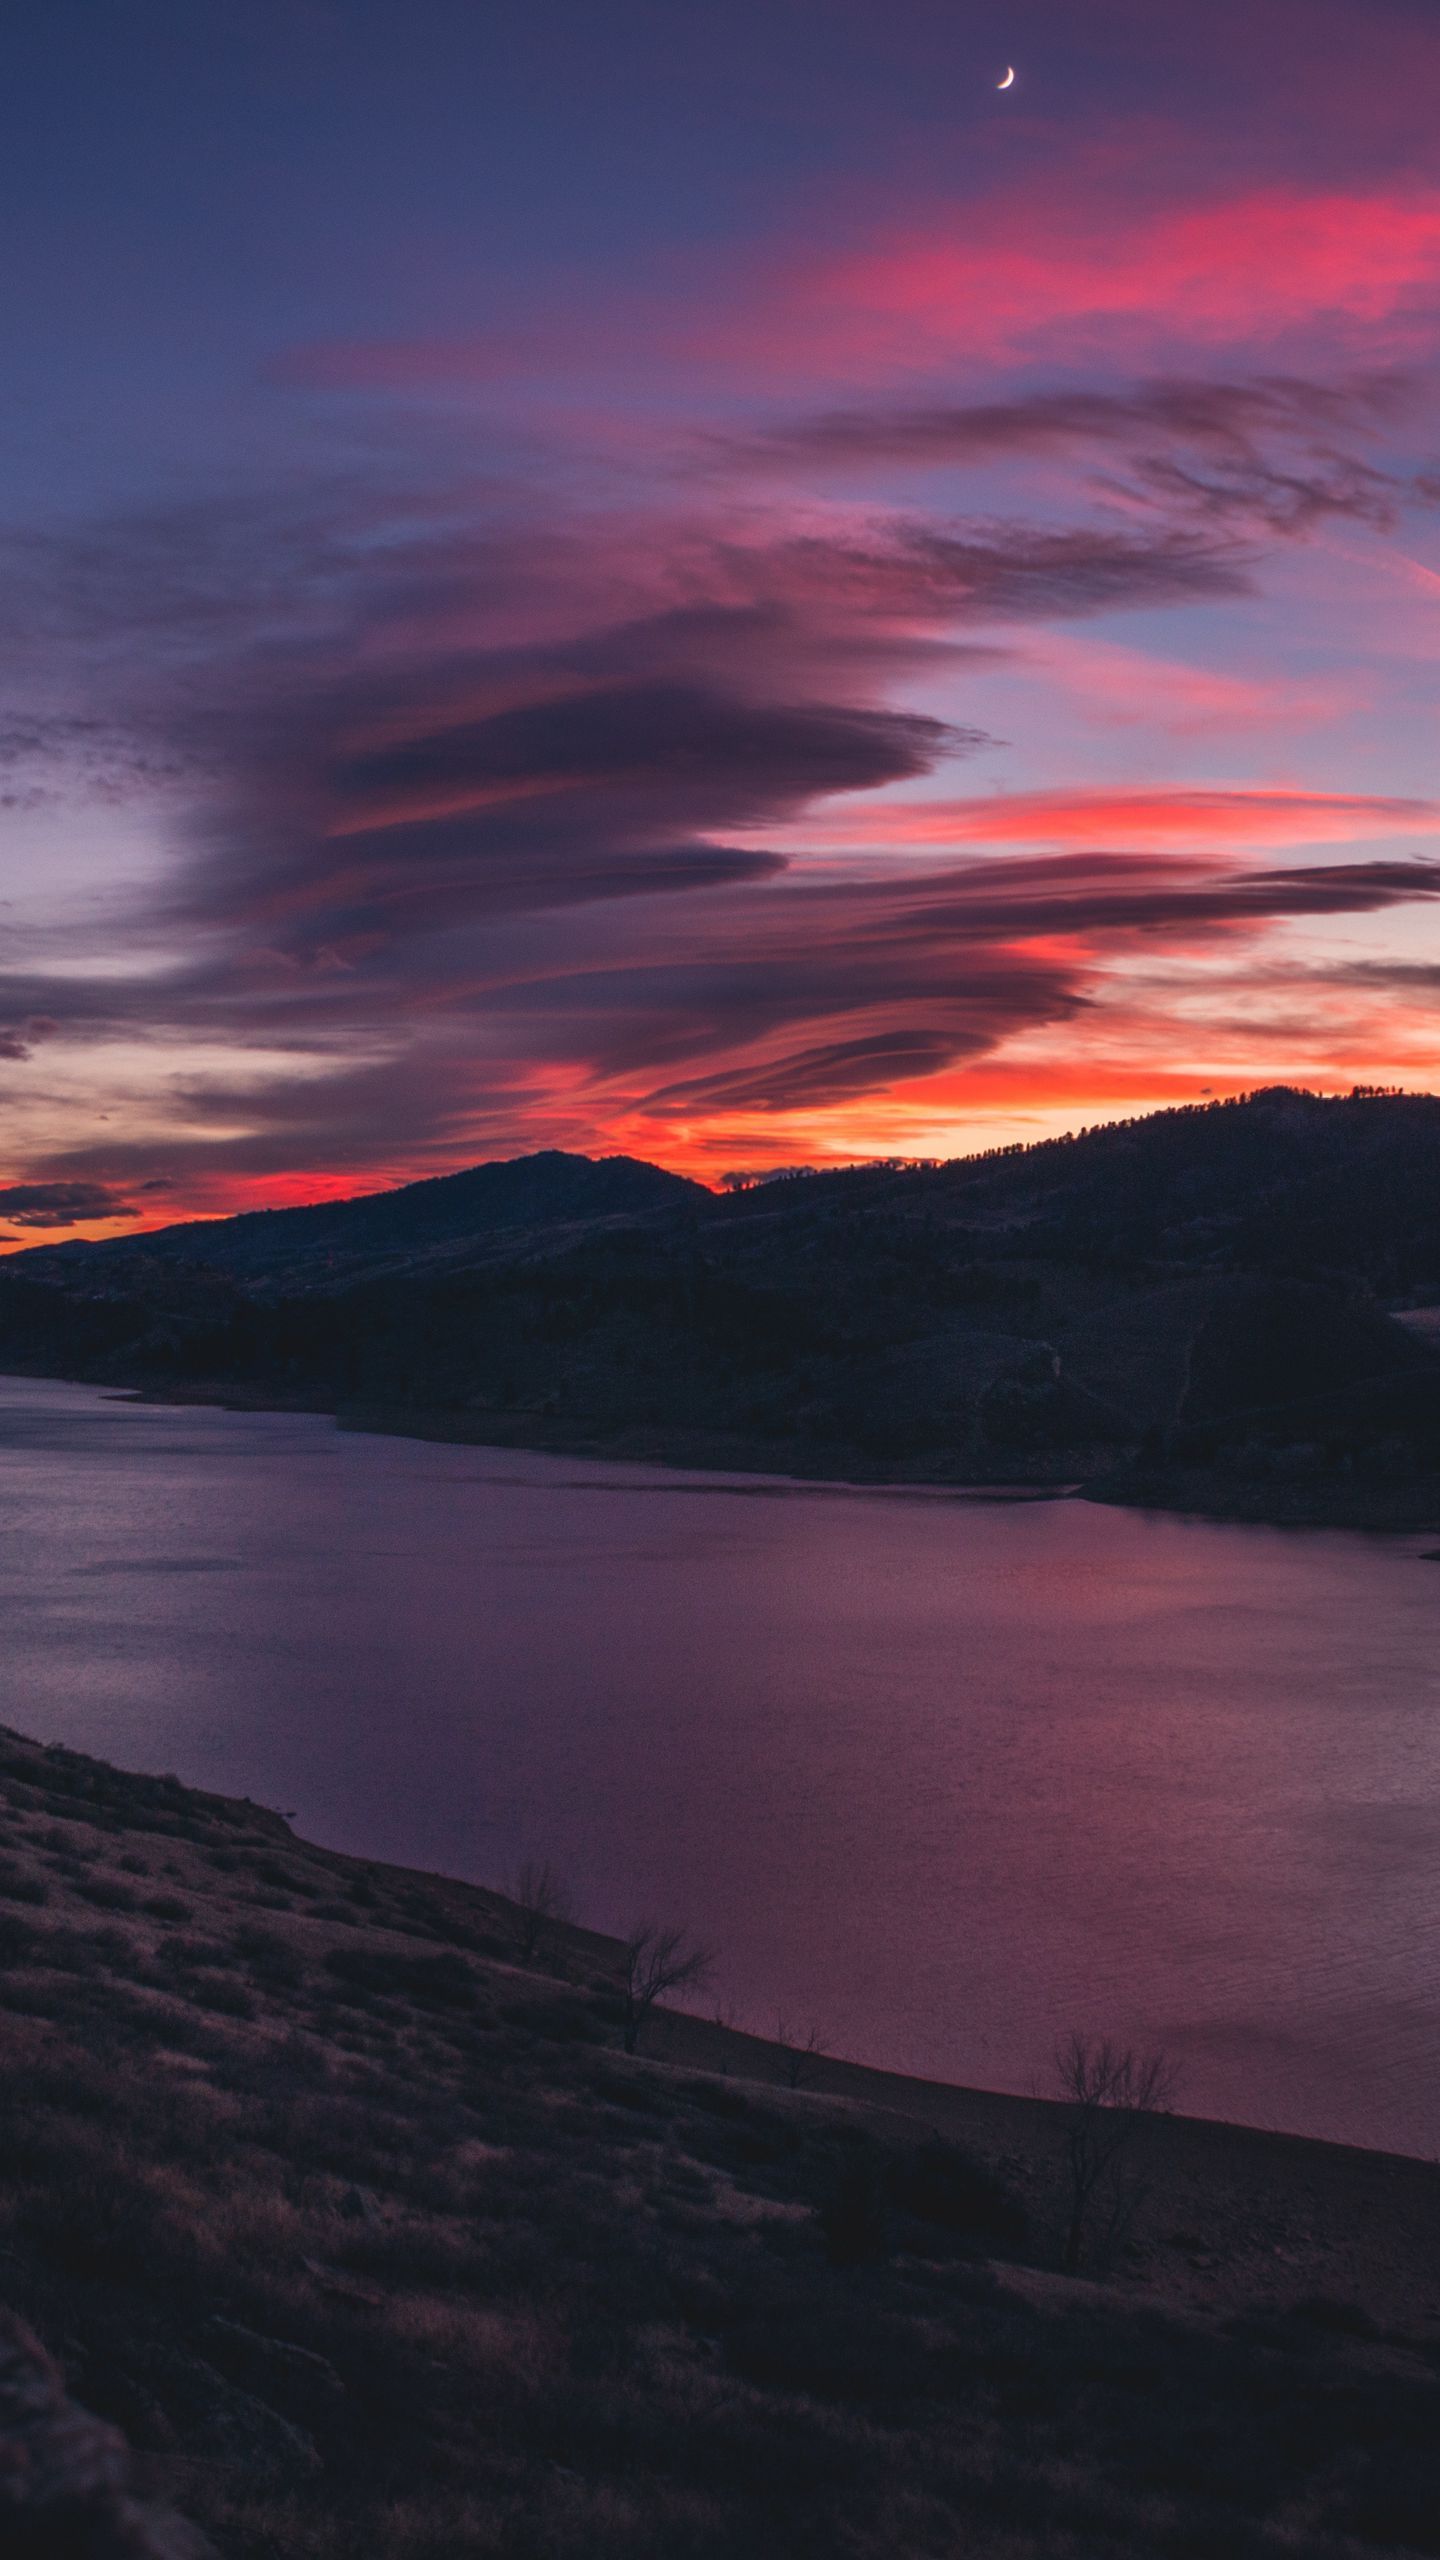 Download wallpaper 1440x2560 mountains, river, sunset, sky qhd